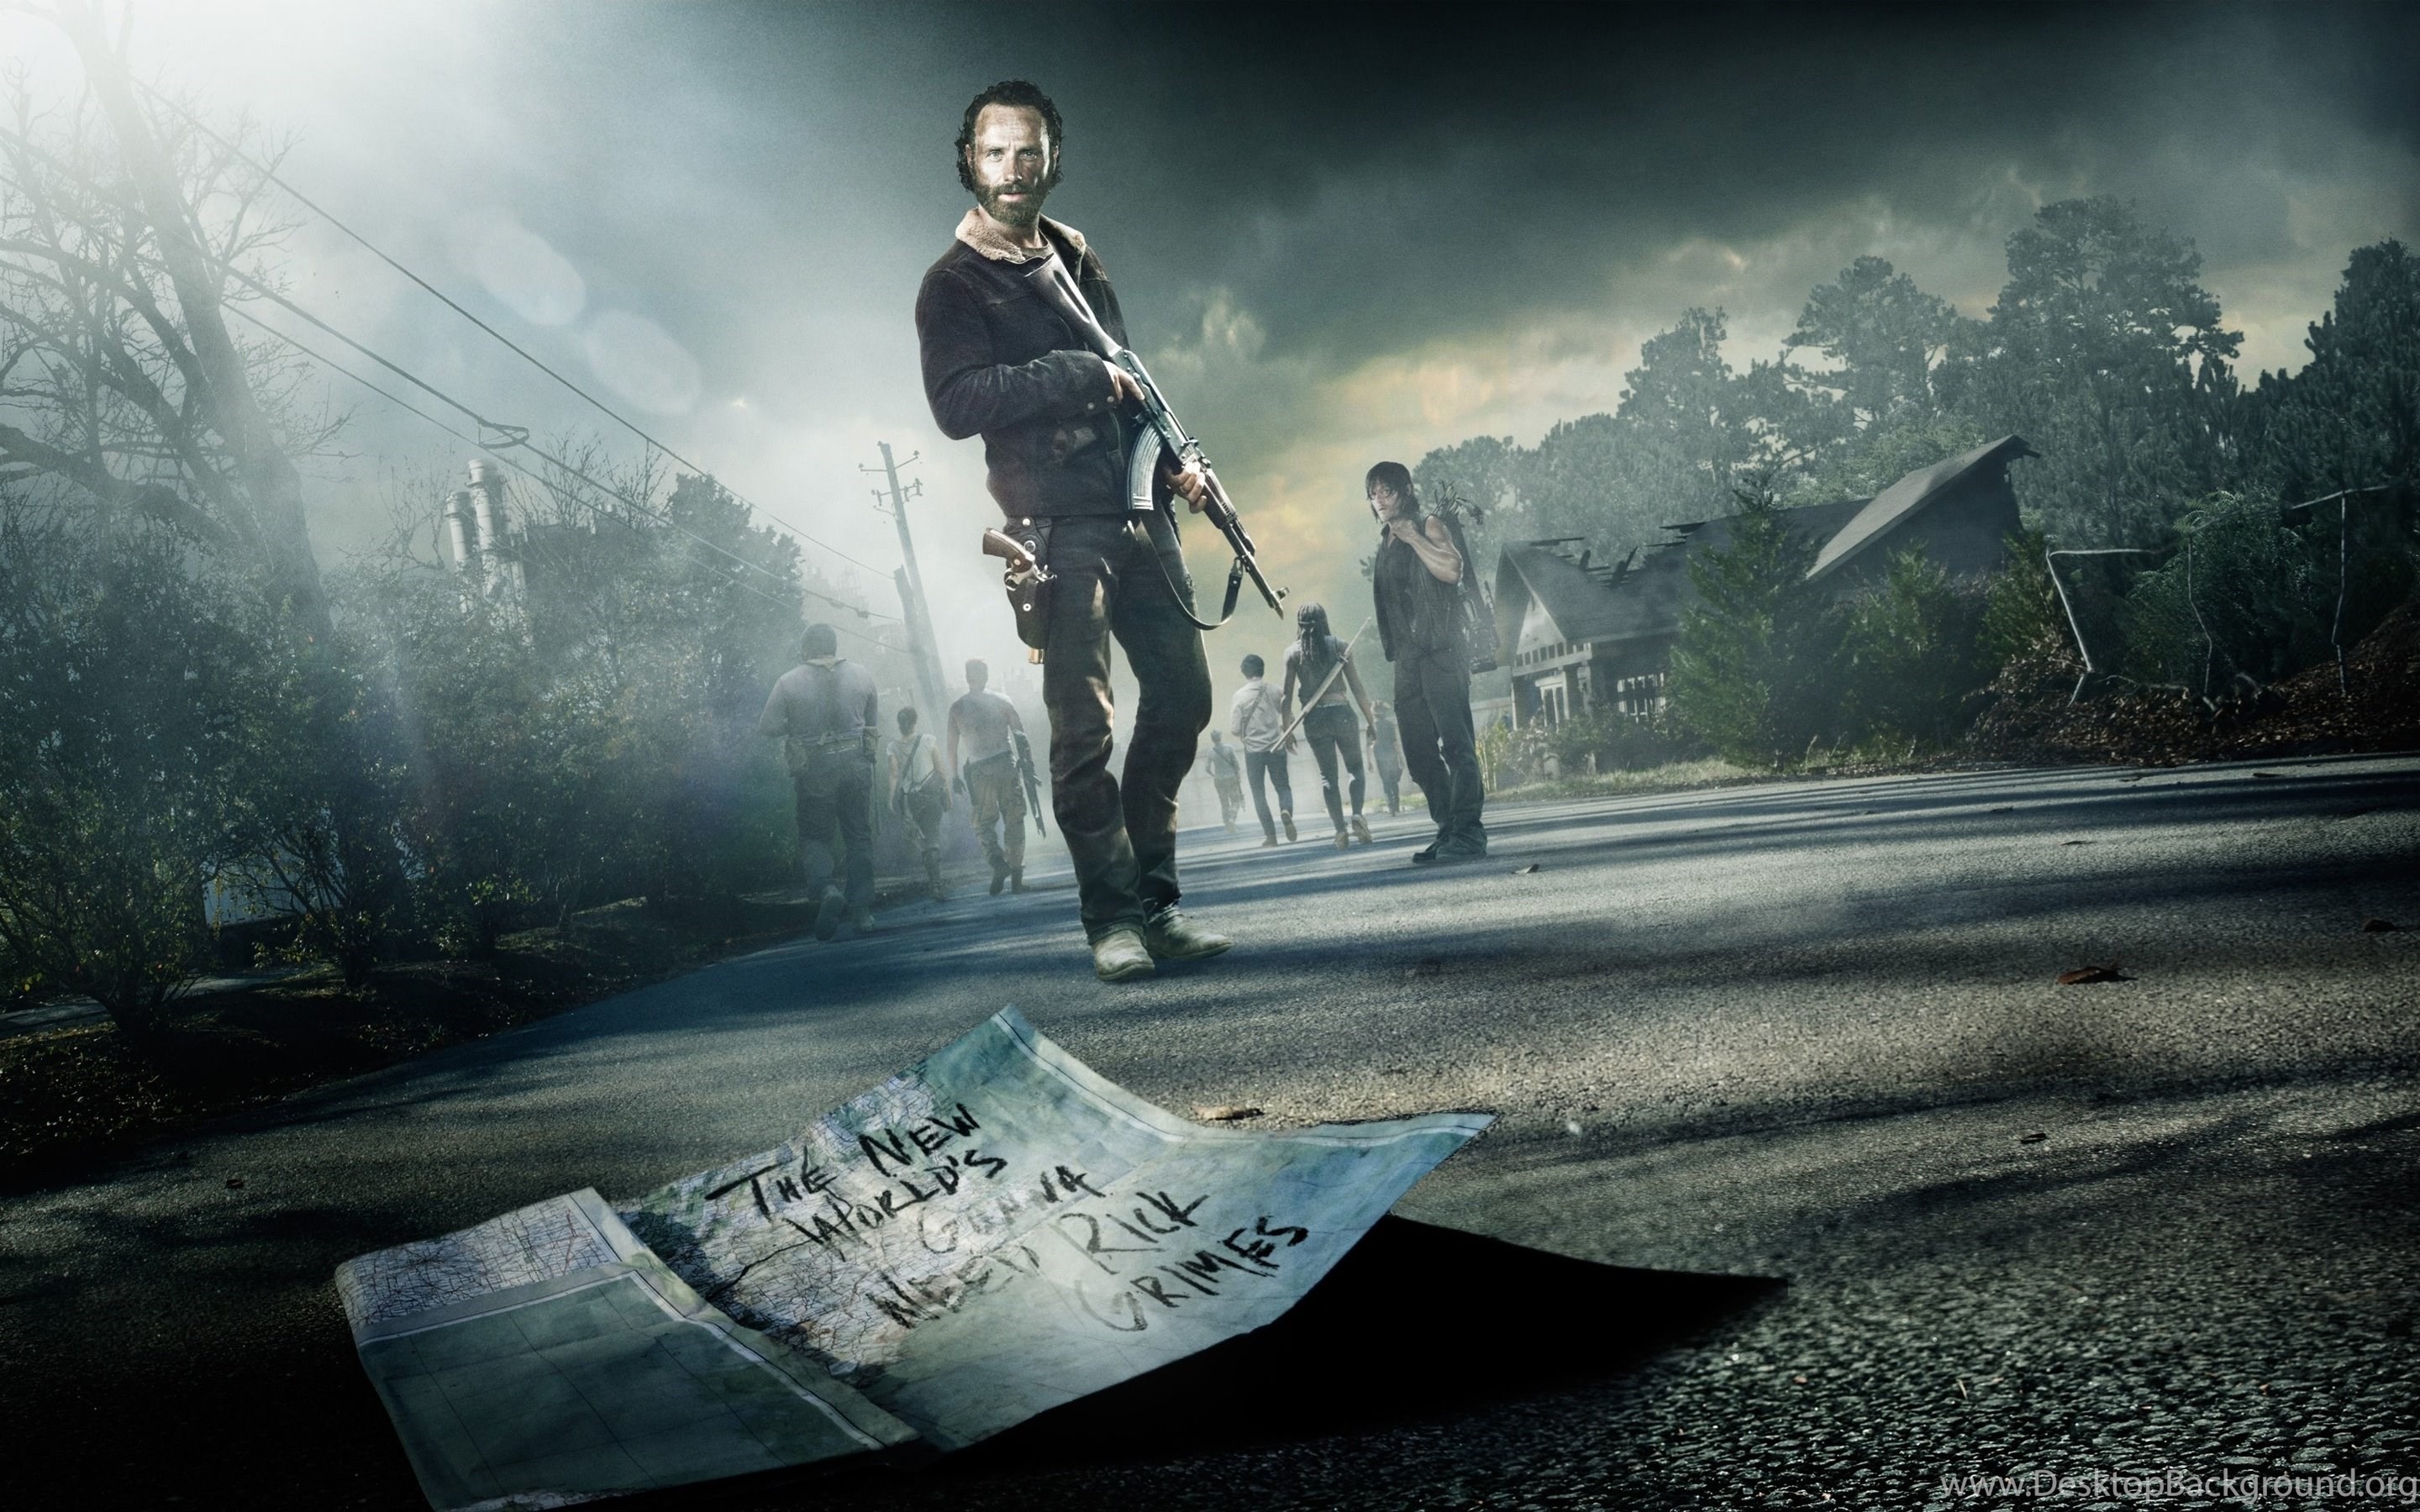 2880x1800 Cool The Walking Dead Backgrounds Screensaver